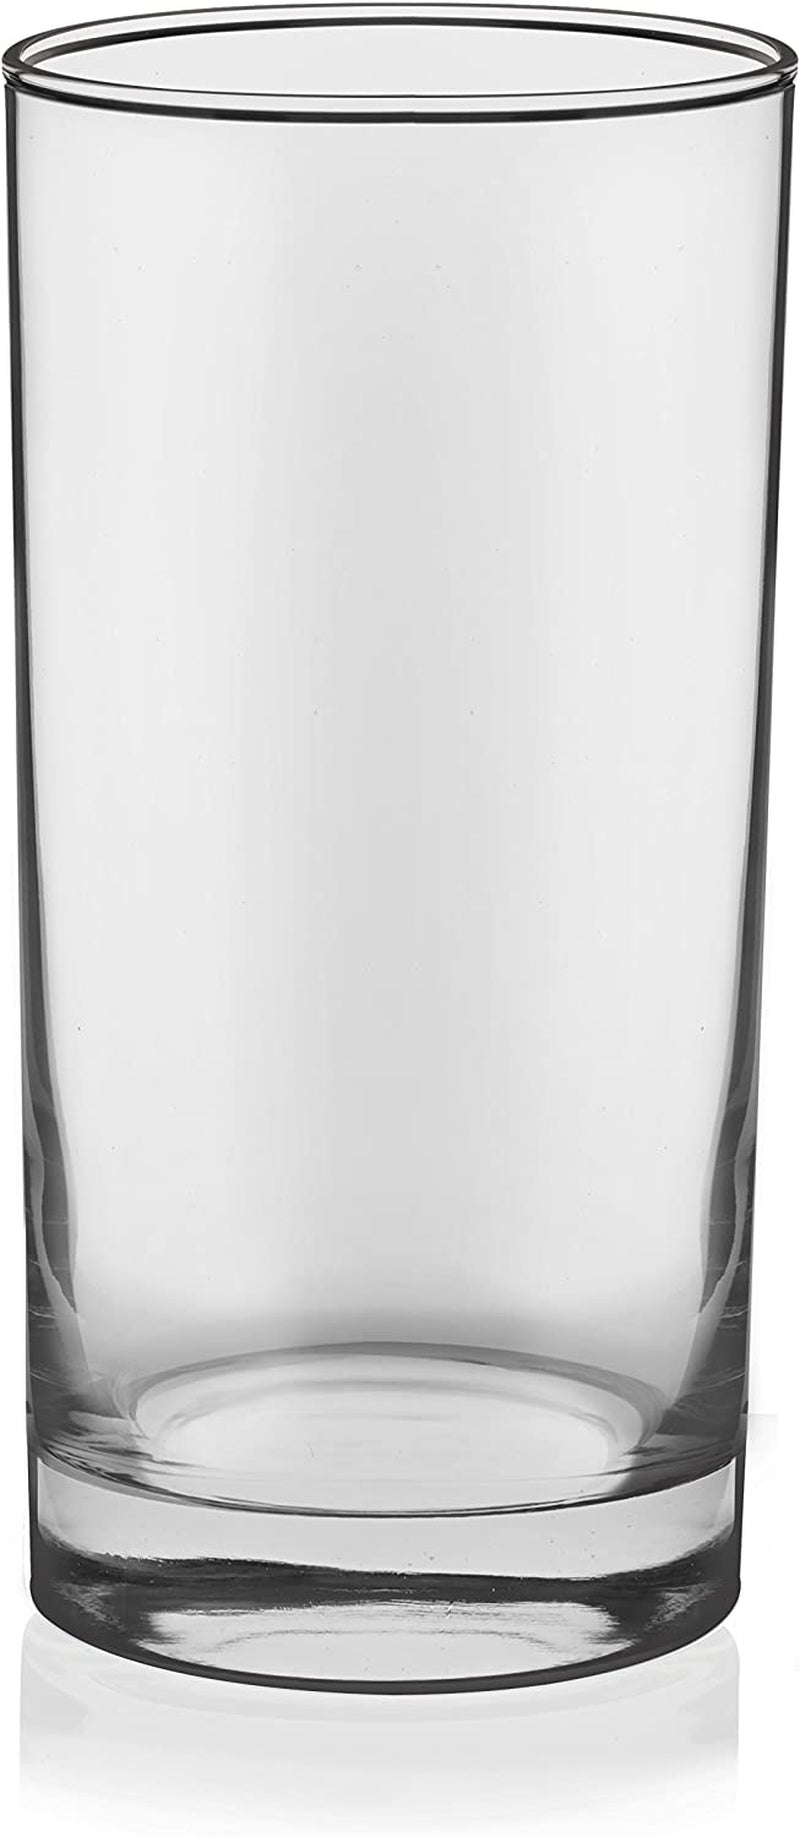 Libbey Heavy Base Tumbler Glasses, 15.5-Ounce, Set of 8 Home & Garden > Kitchen & Dining > Tableware > Drinkware Libbey   